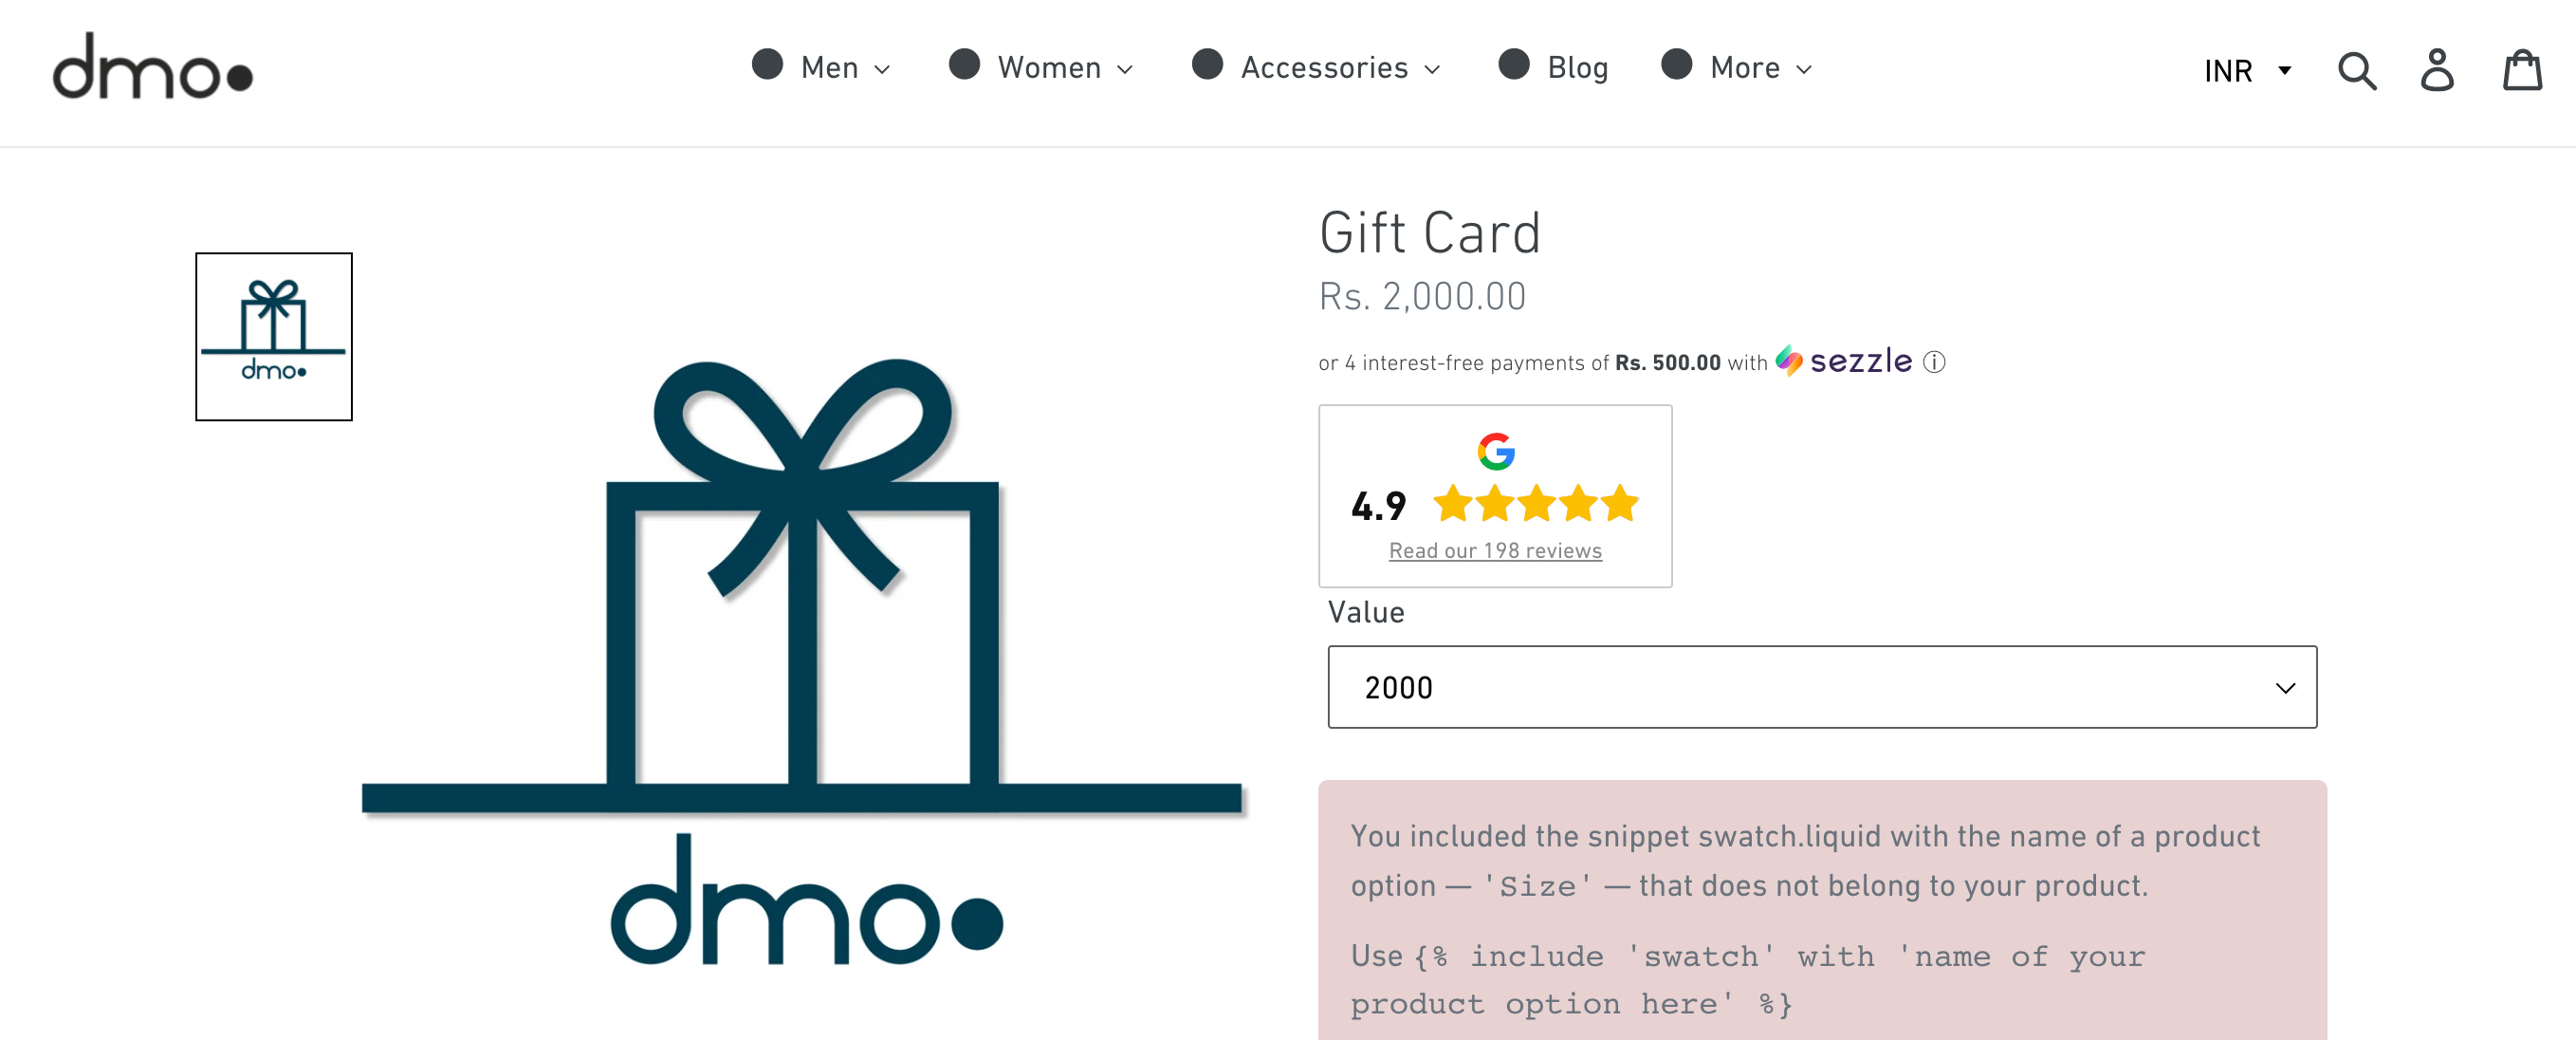 dmodot shopify gift cards example